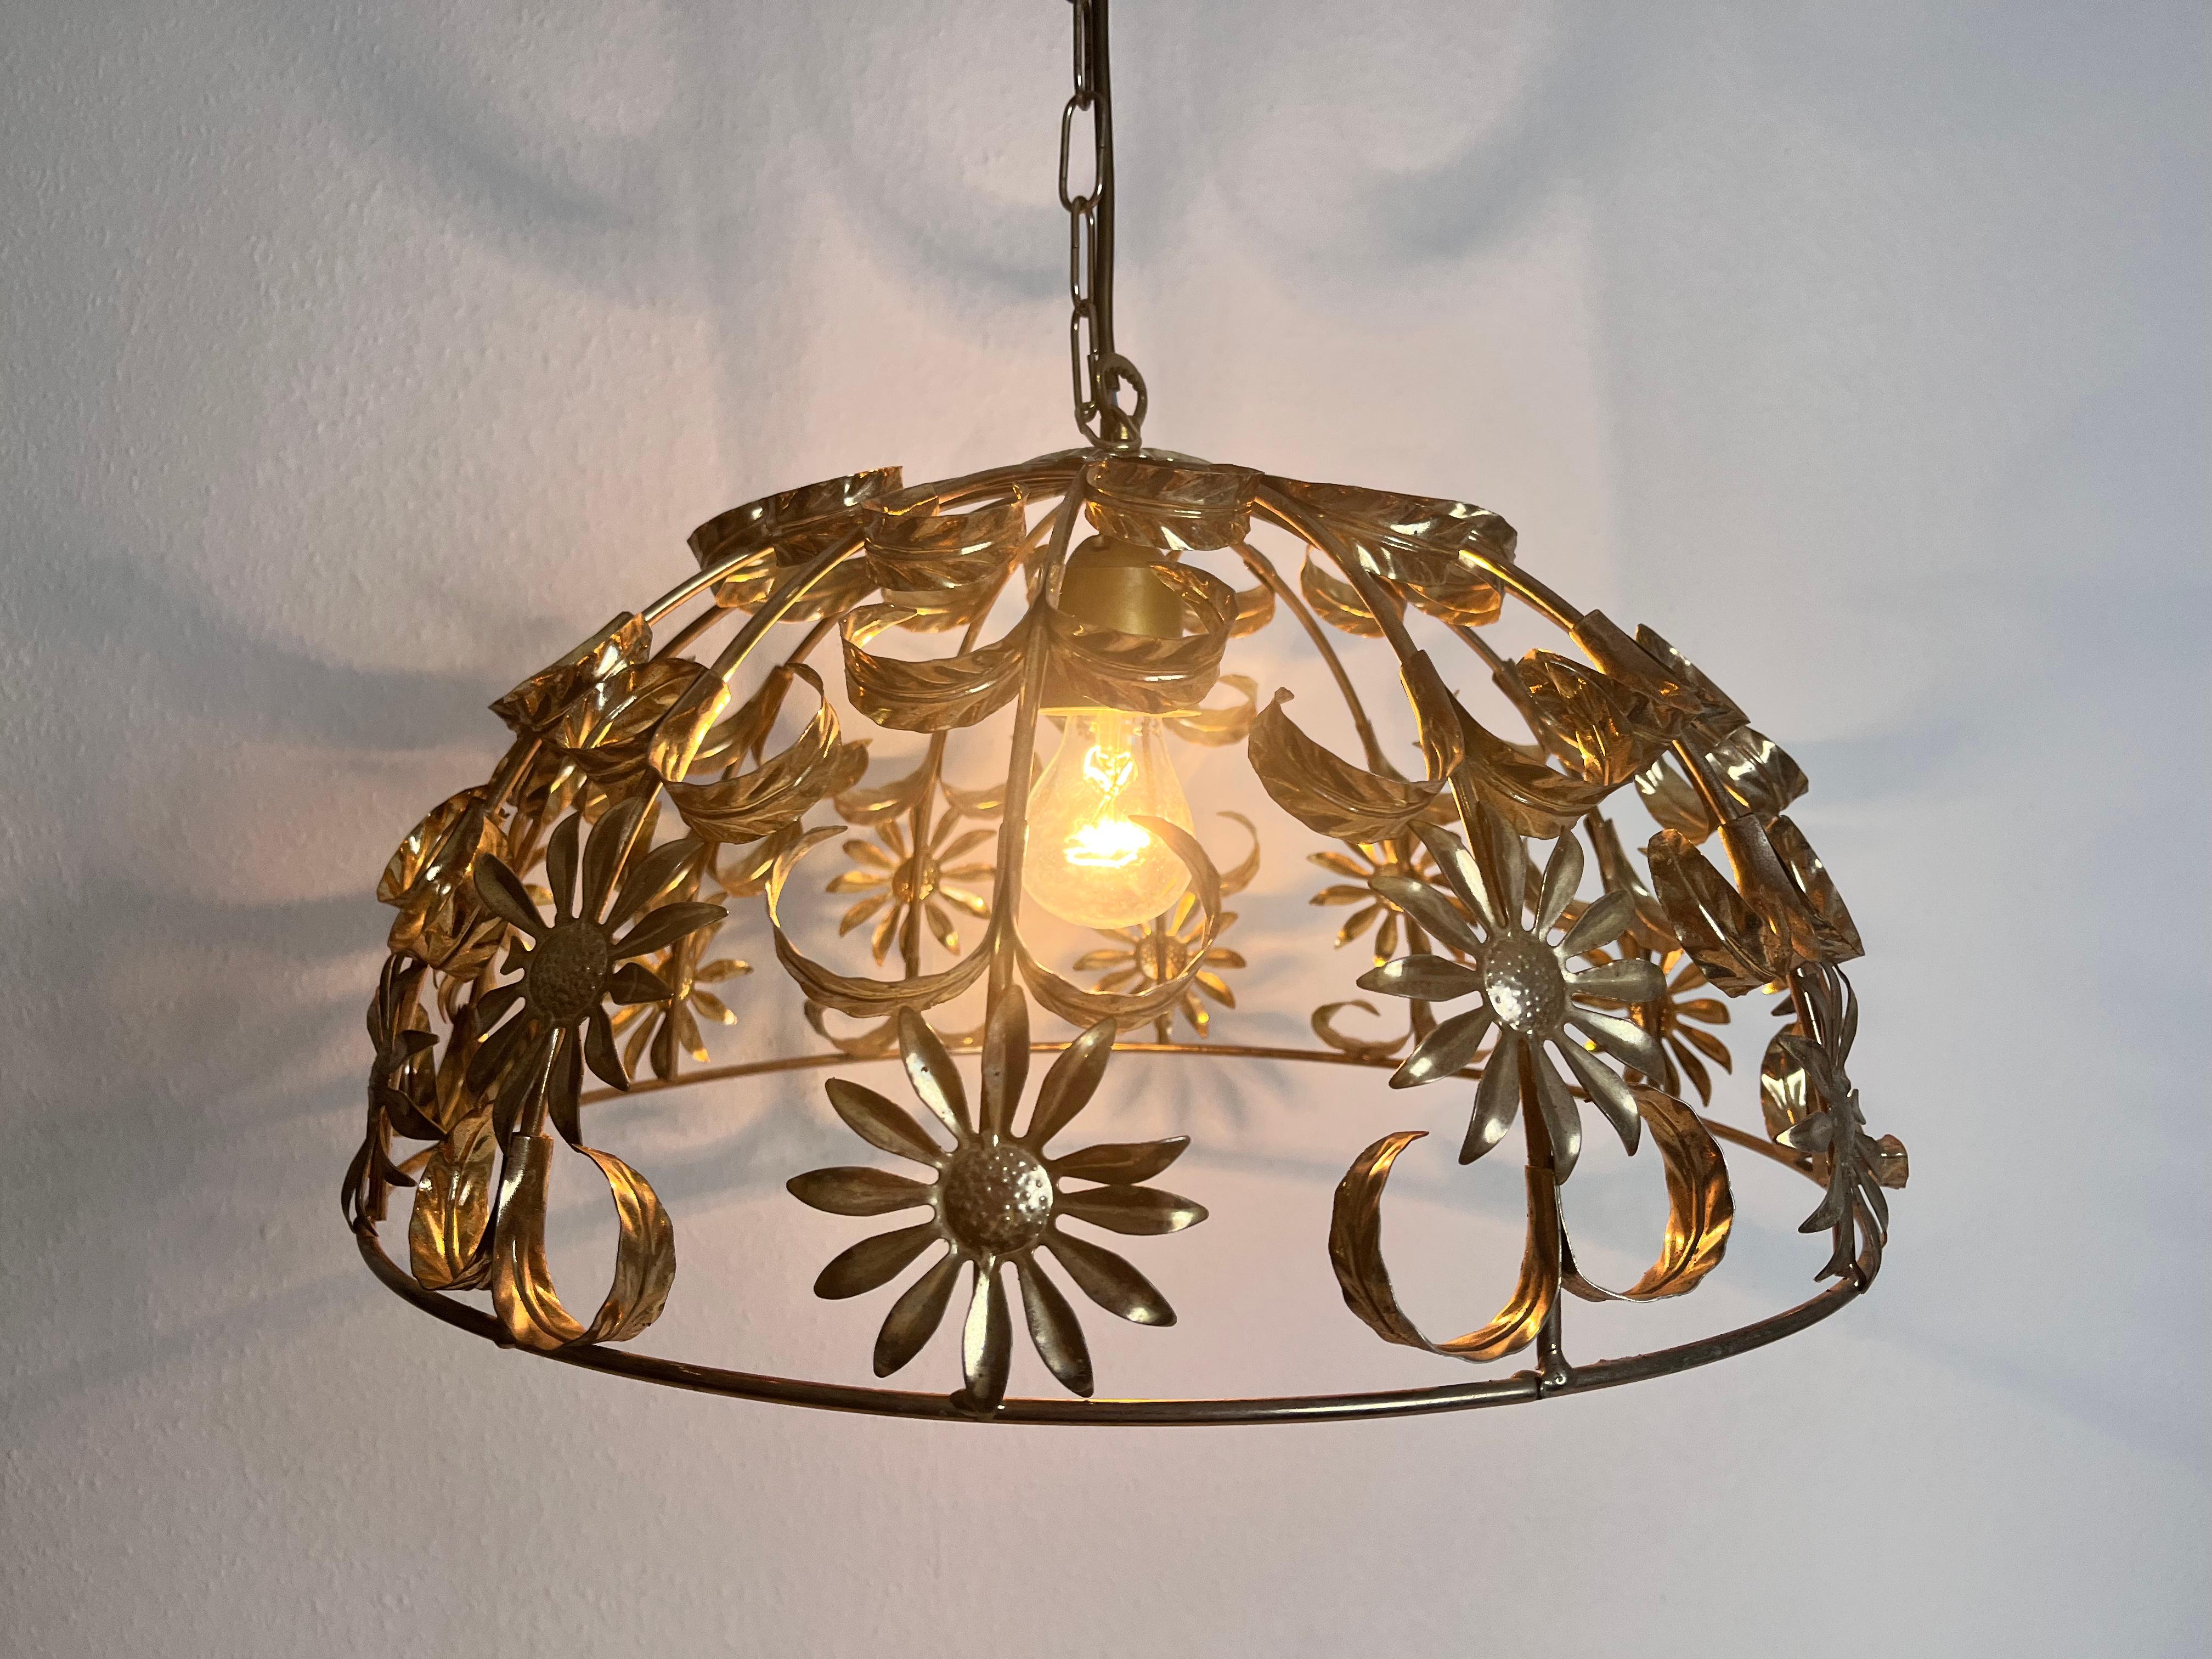 Florentine Flower Shape Pendant Lamp Attributed to Banci Firenze, 1970s For Sale 2